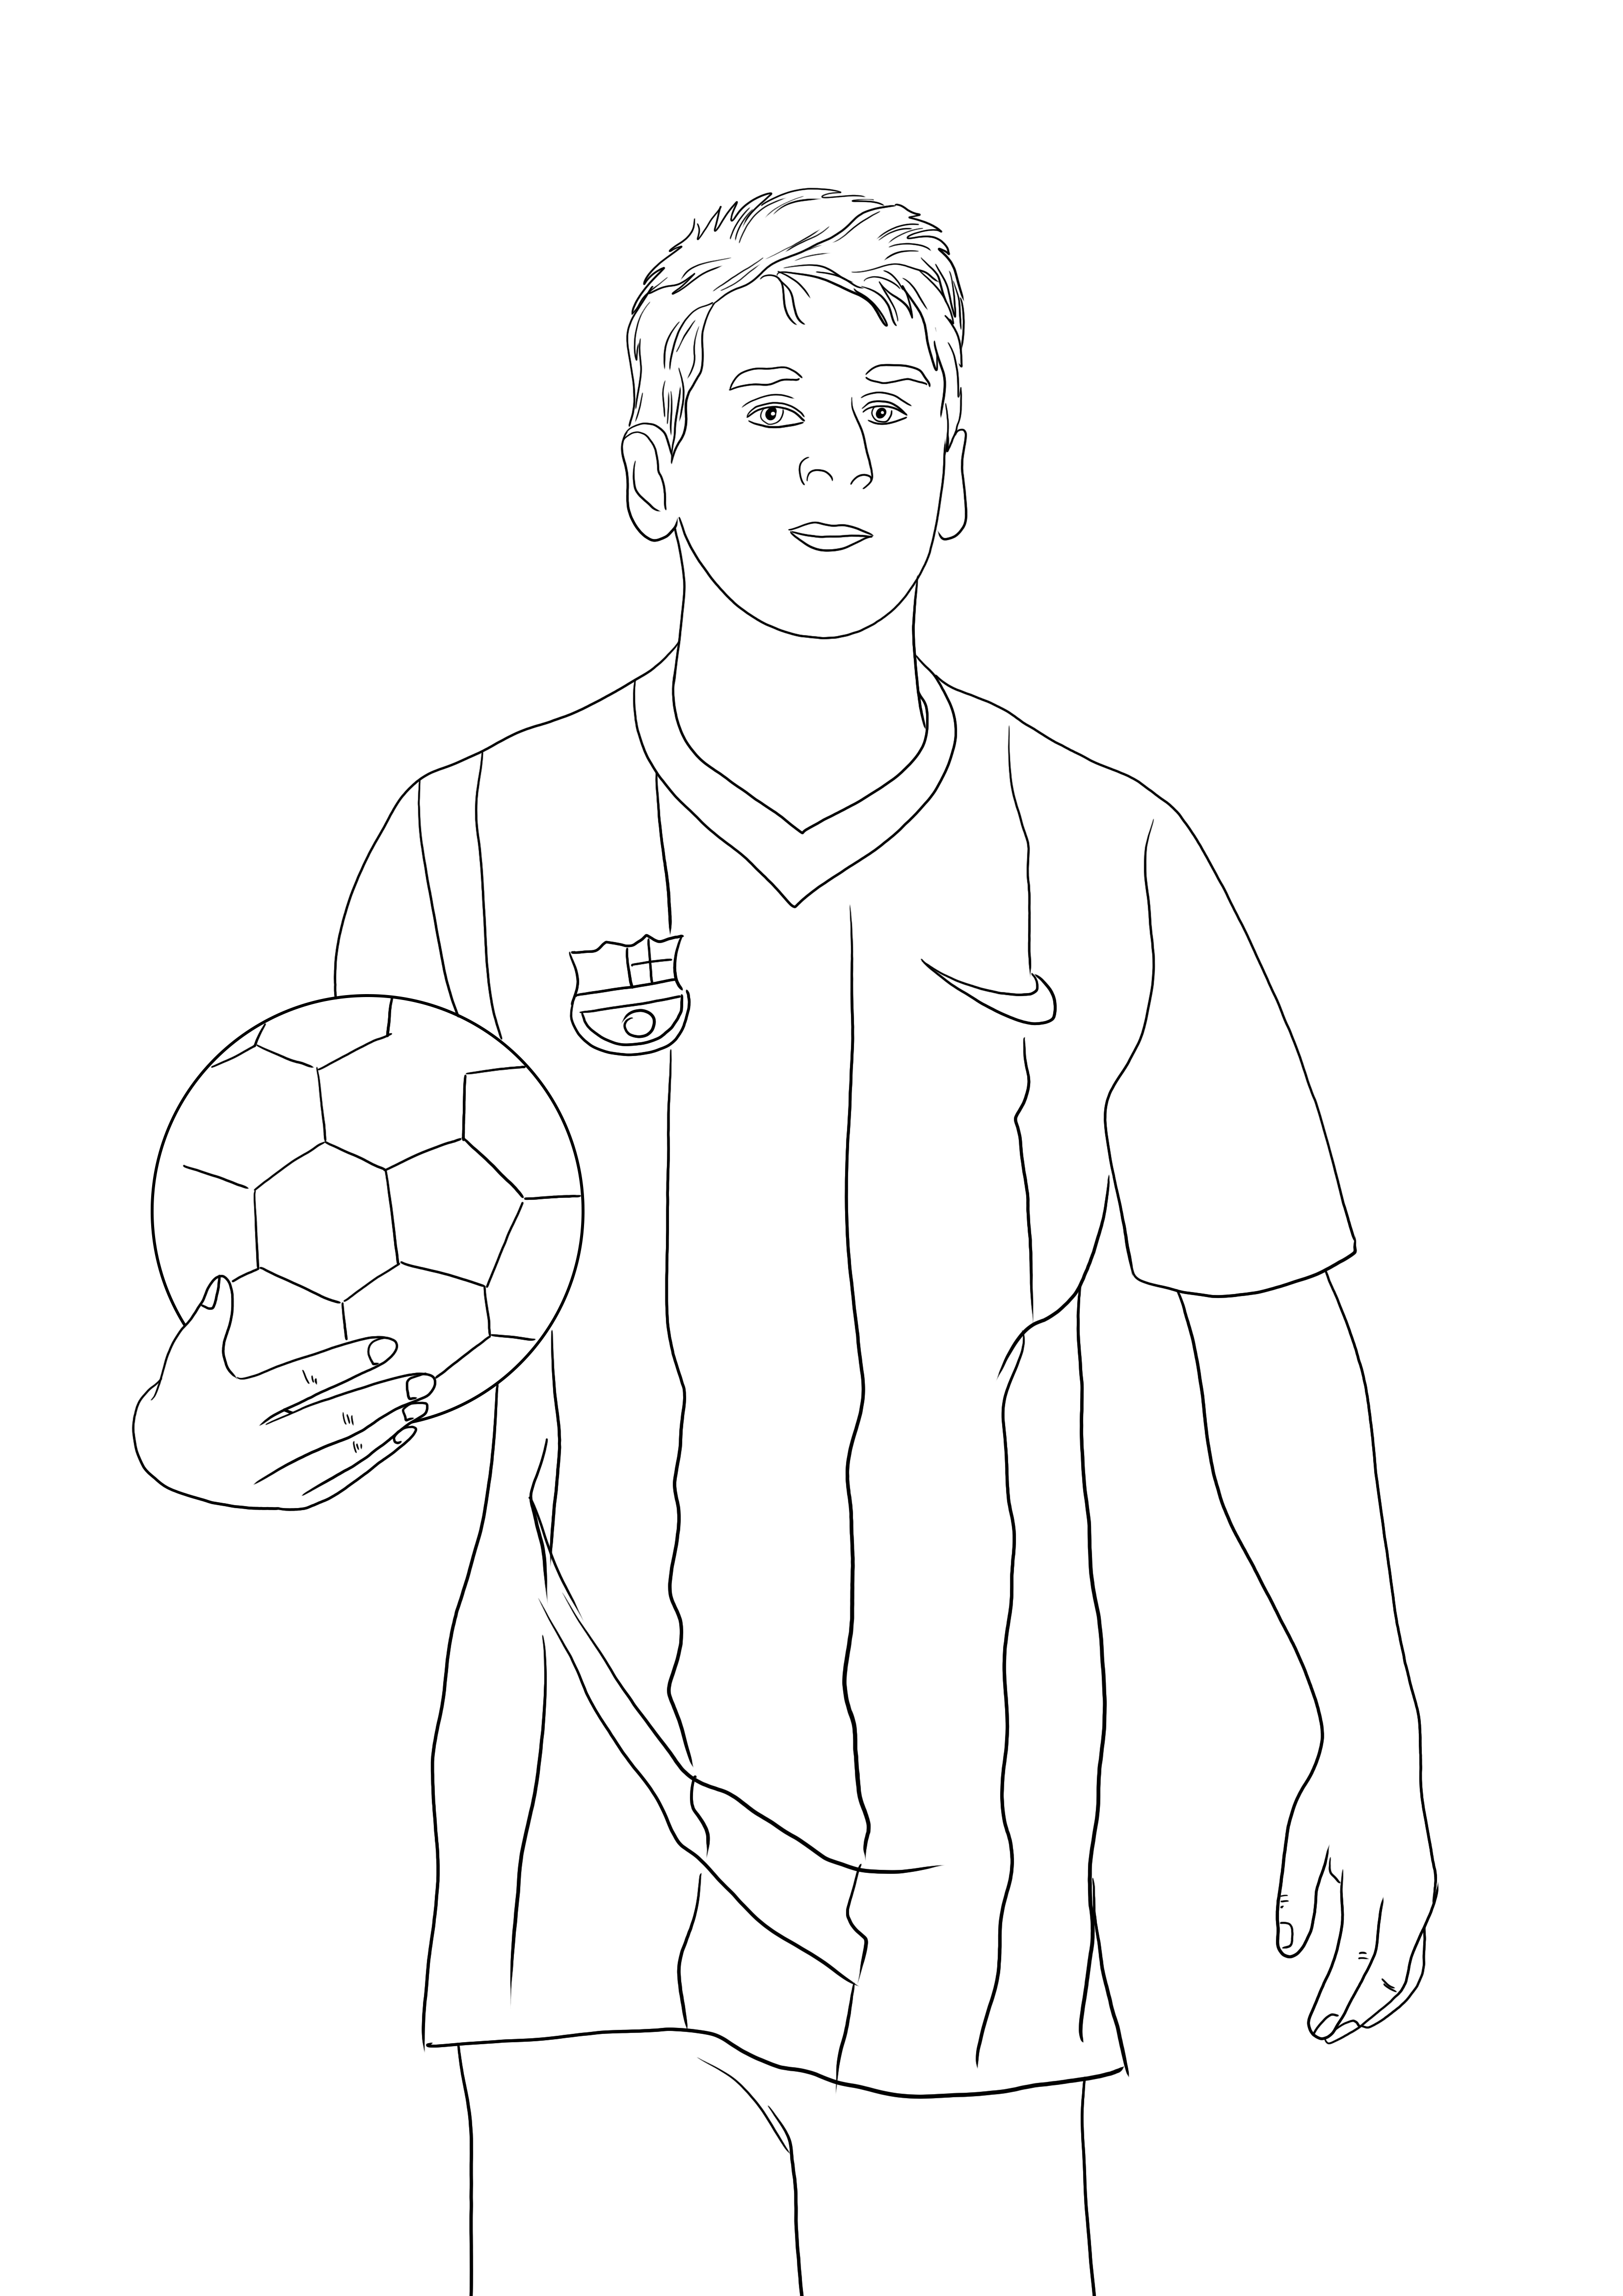 Free lnel messi coloring image to print and have fun while coloring